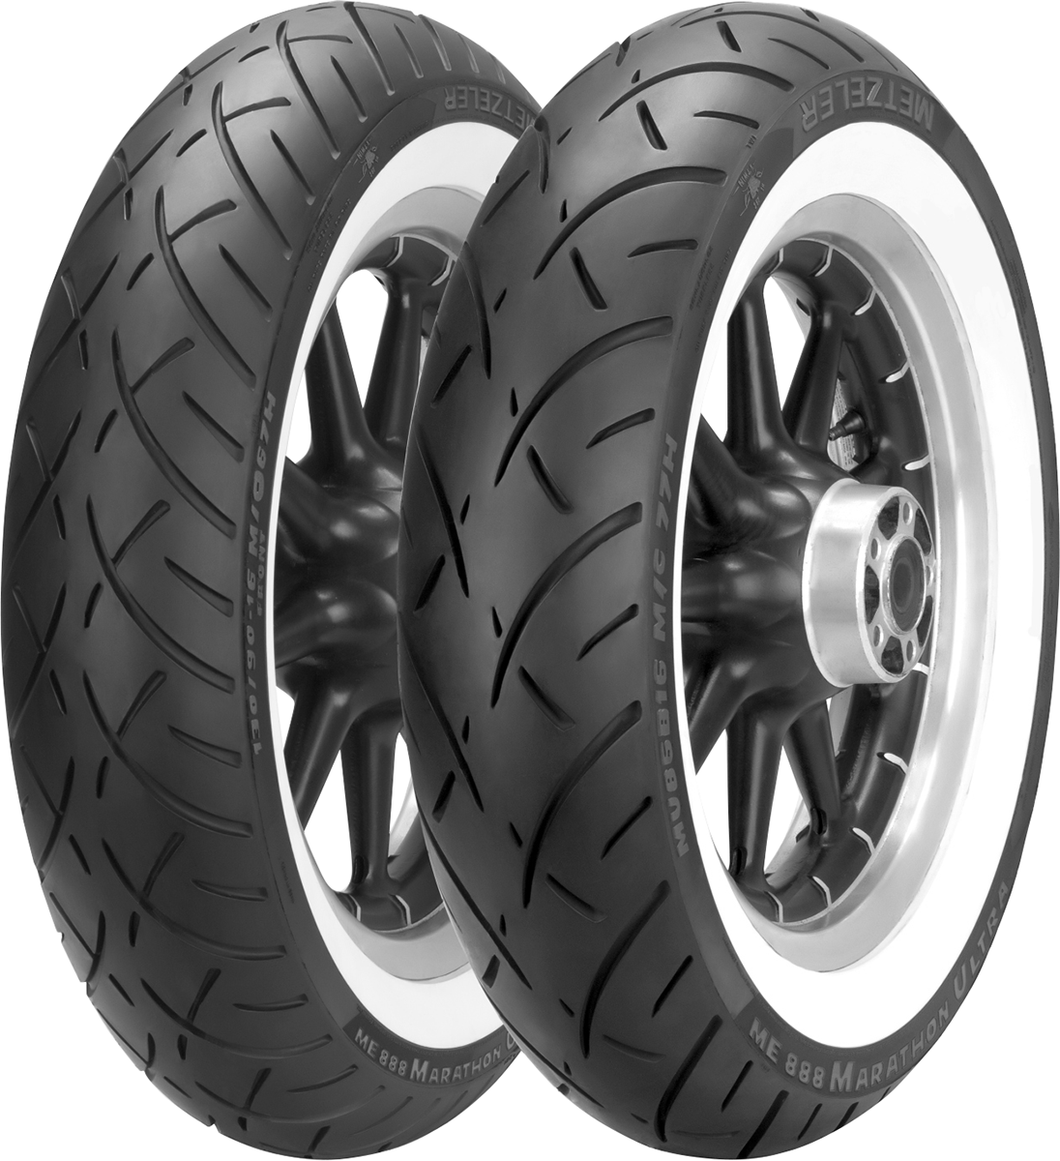 Tire - ME 888 - Wide Whitewall - 140/90B16